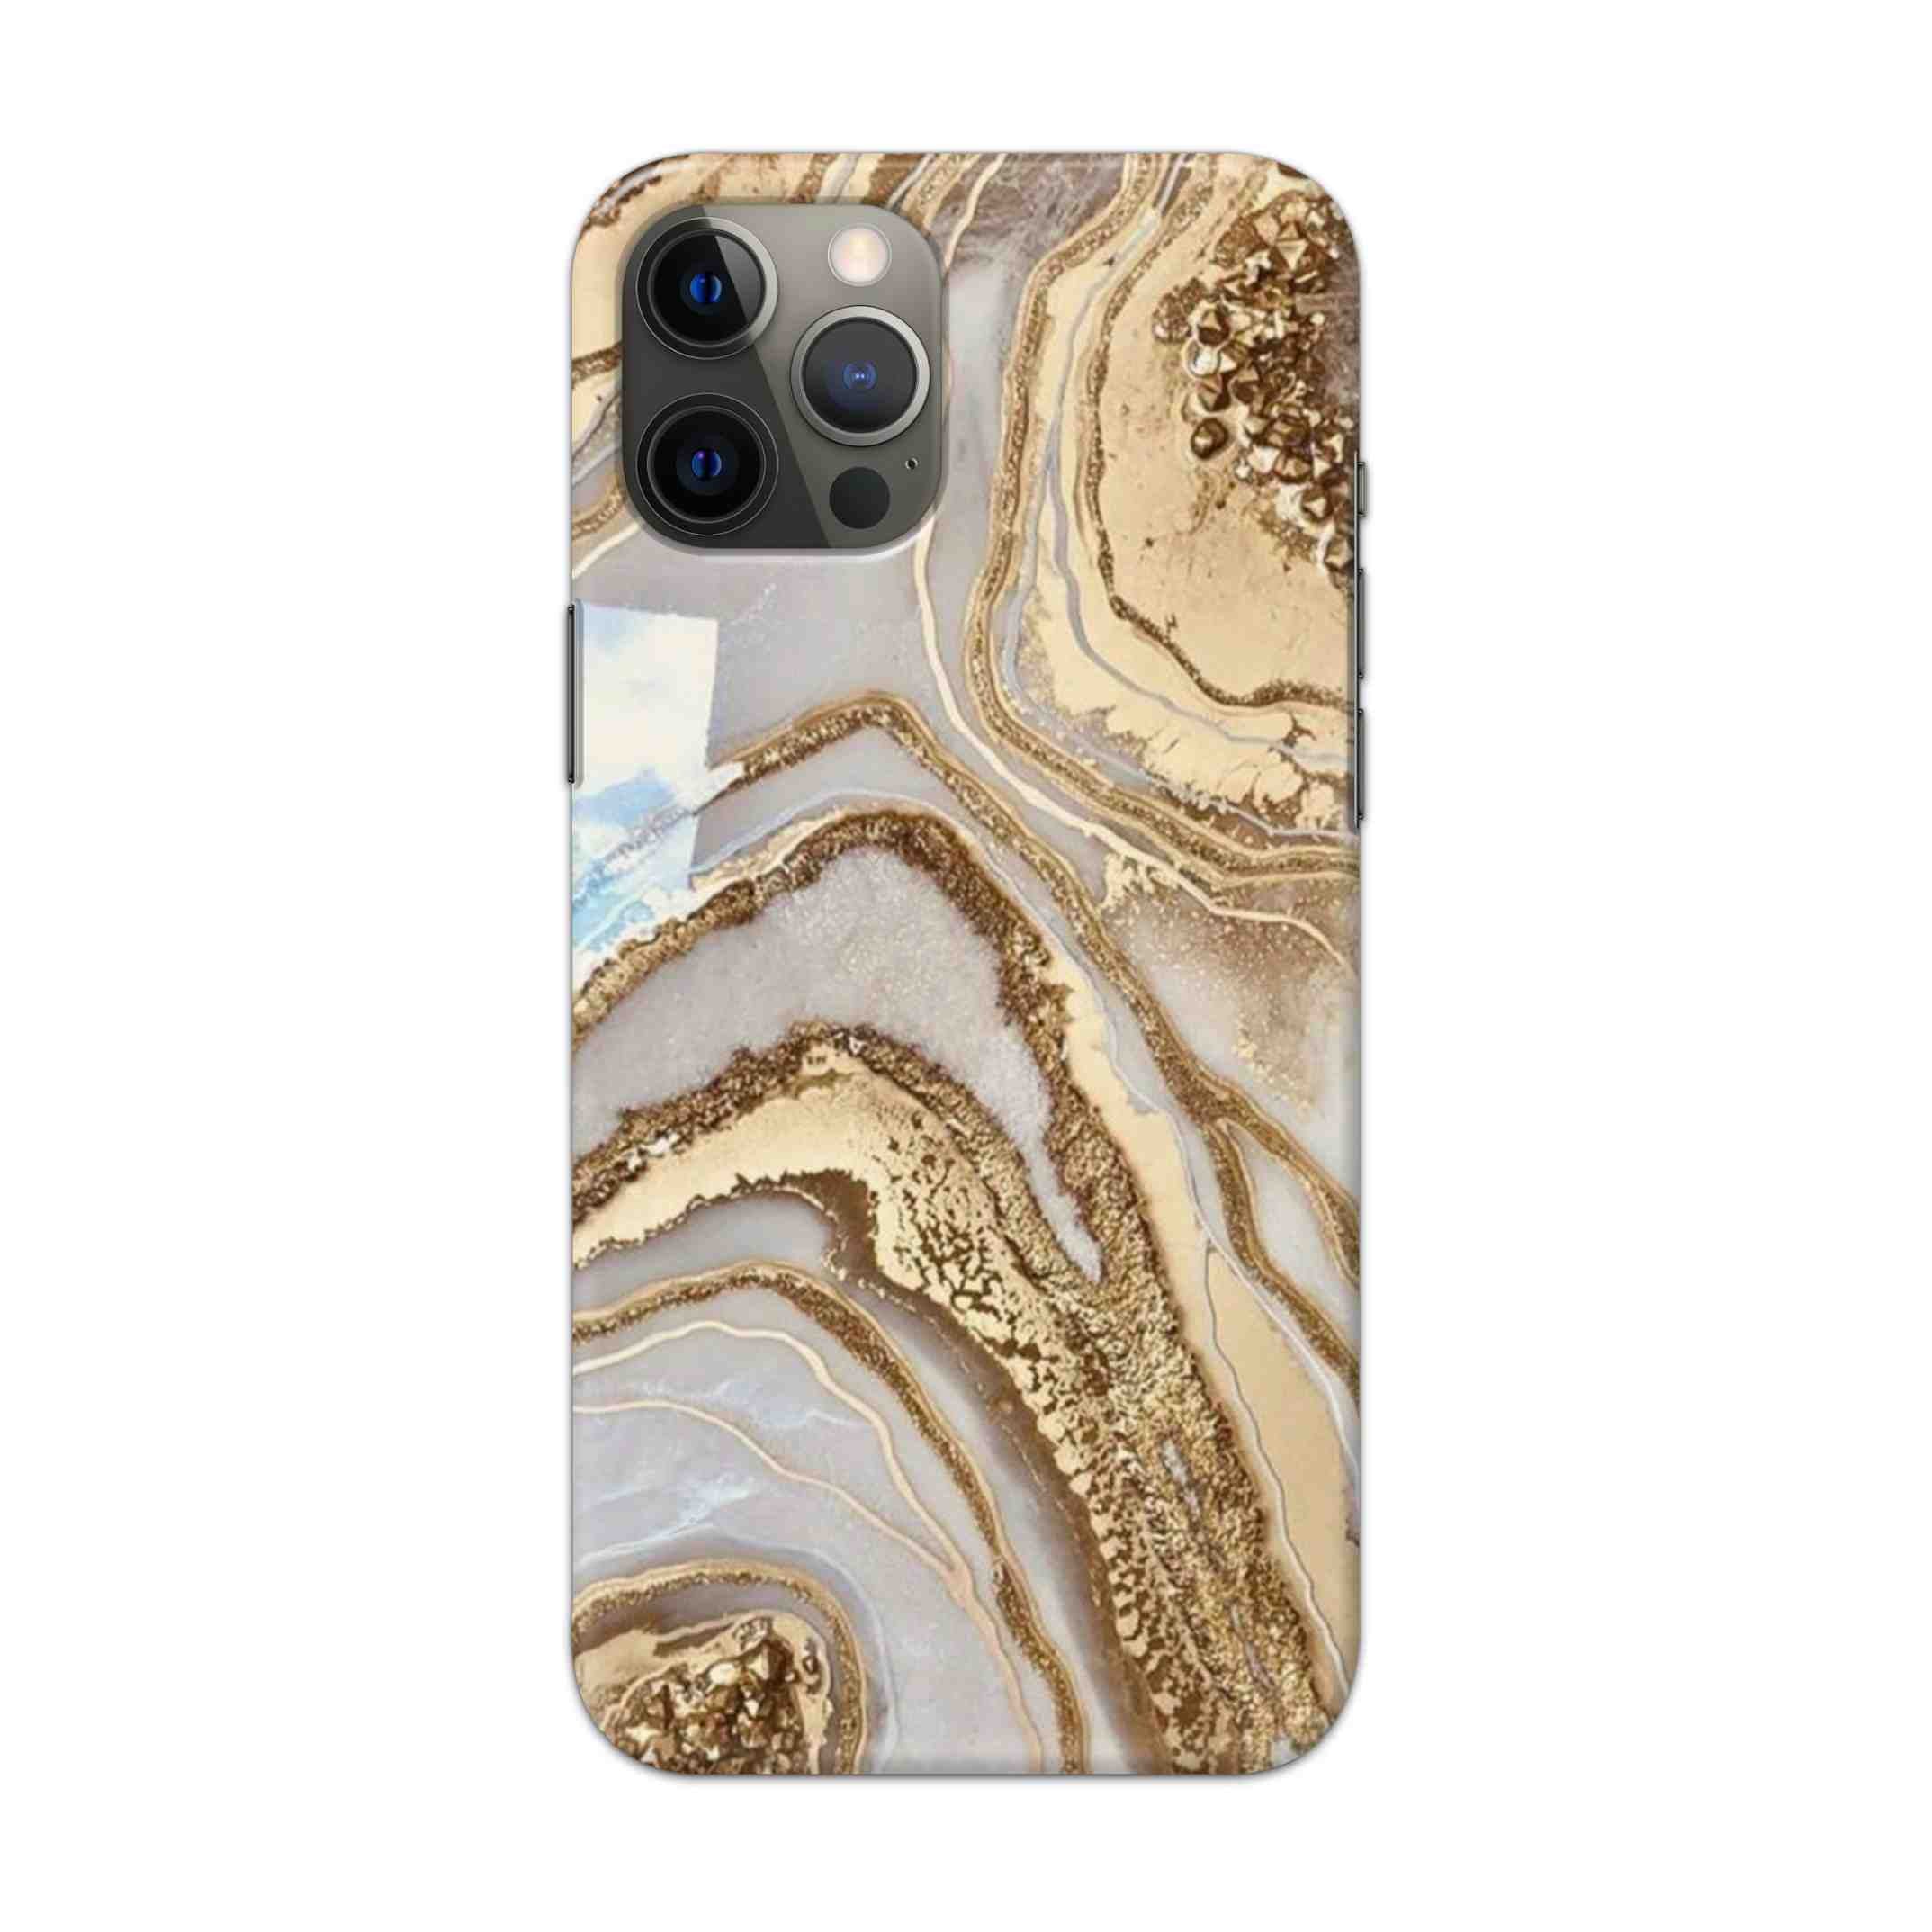 Buy Golden Texture Hard Back Mobile Phone Case Cover For Apple iPhone 13 Pro Max Online